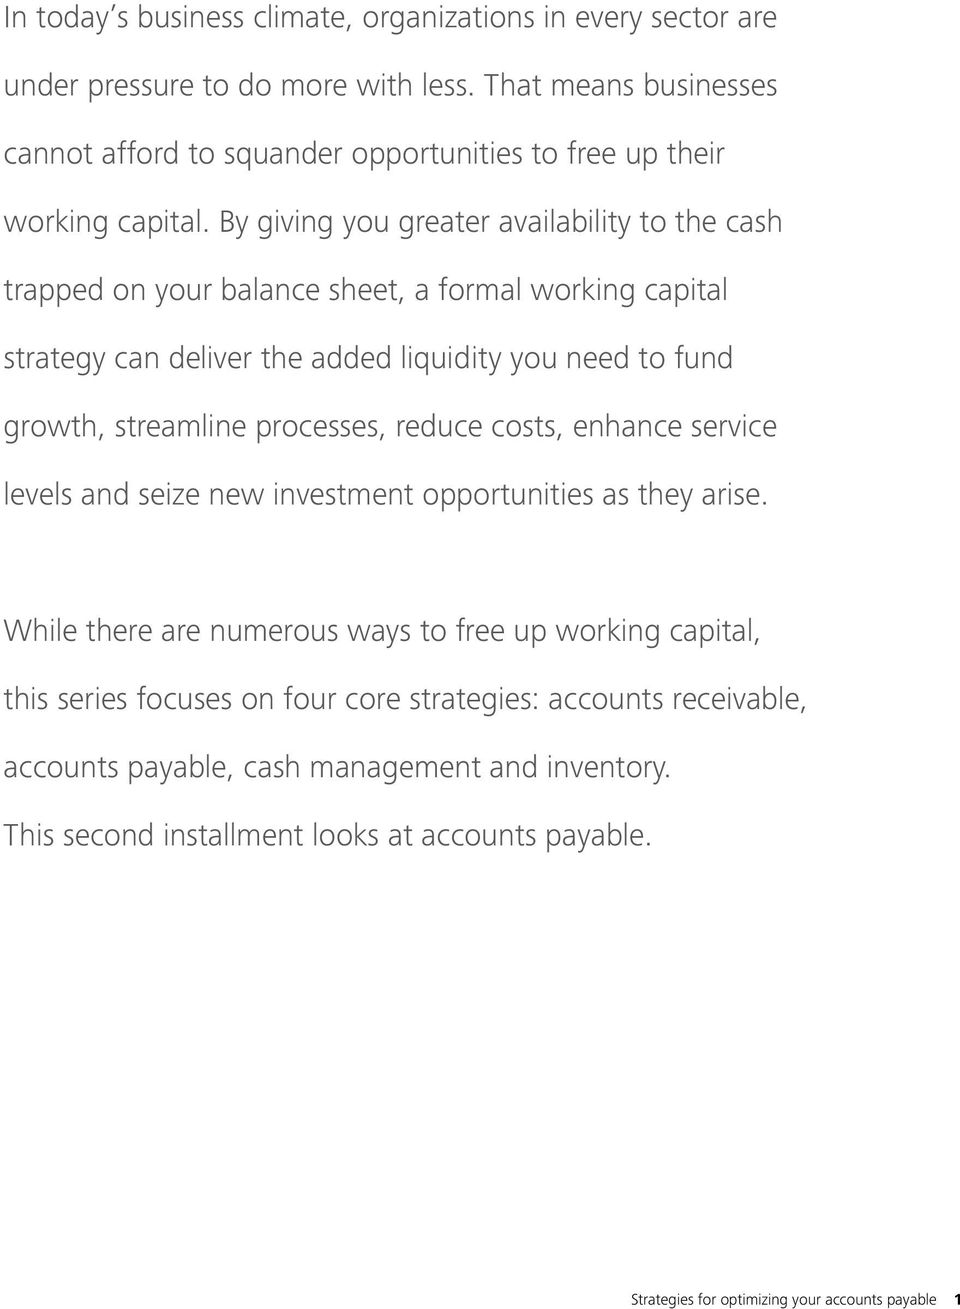 By giving you greater availability to the cash trapped on your balance sheet, a formal working capital strategy can deliver the added liquidity you need to fund growth, streamline